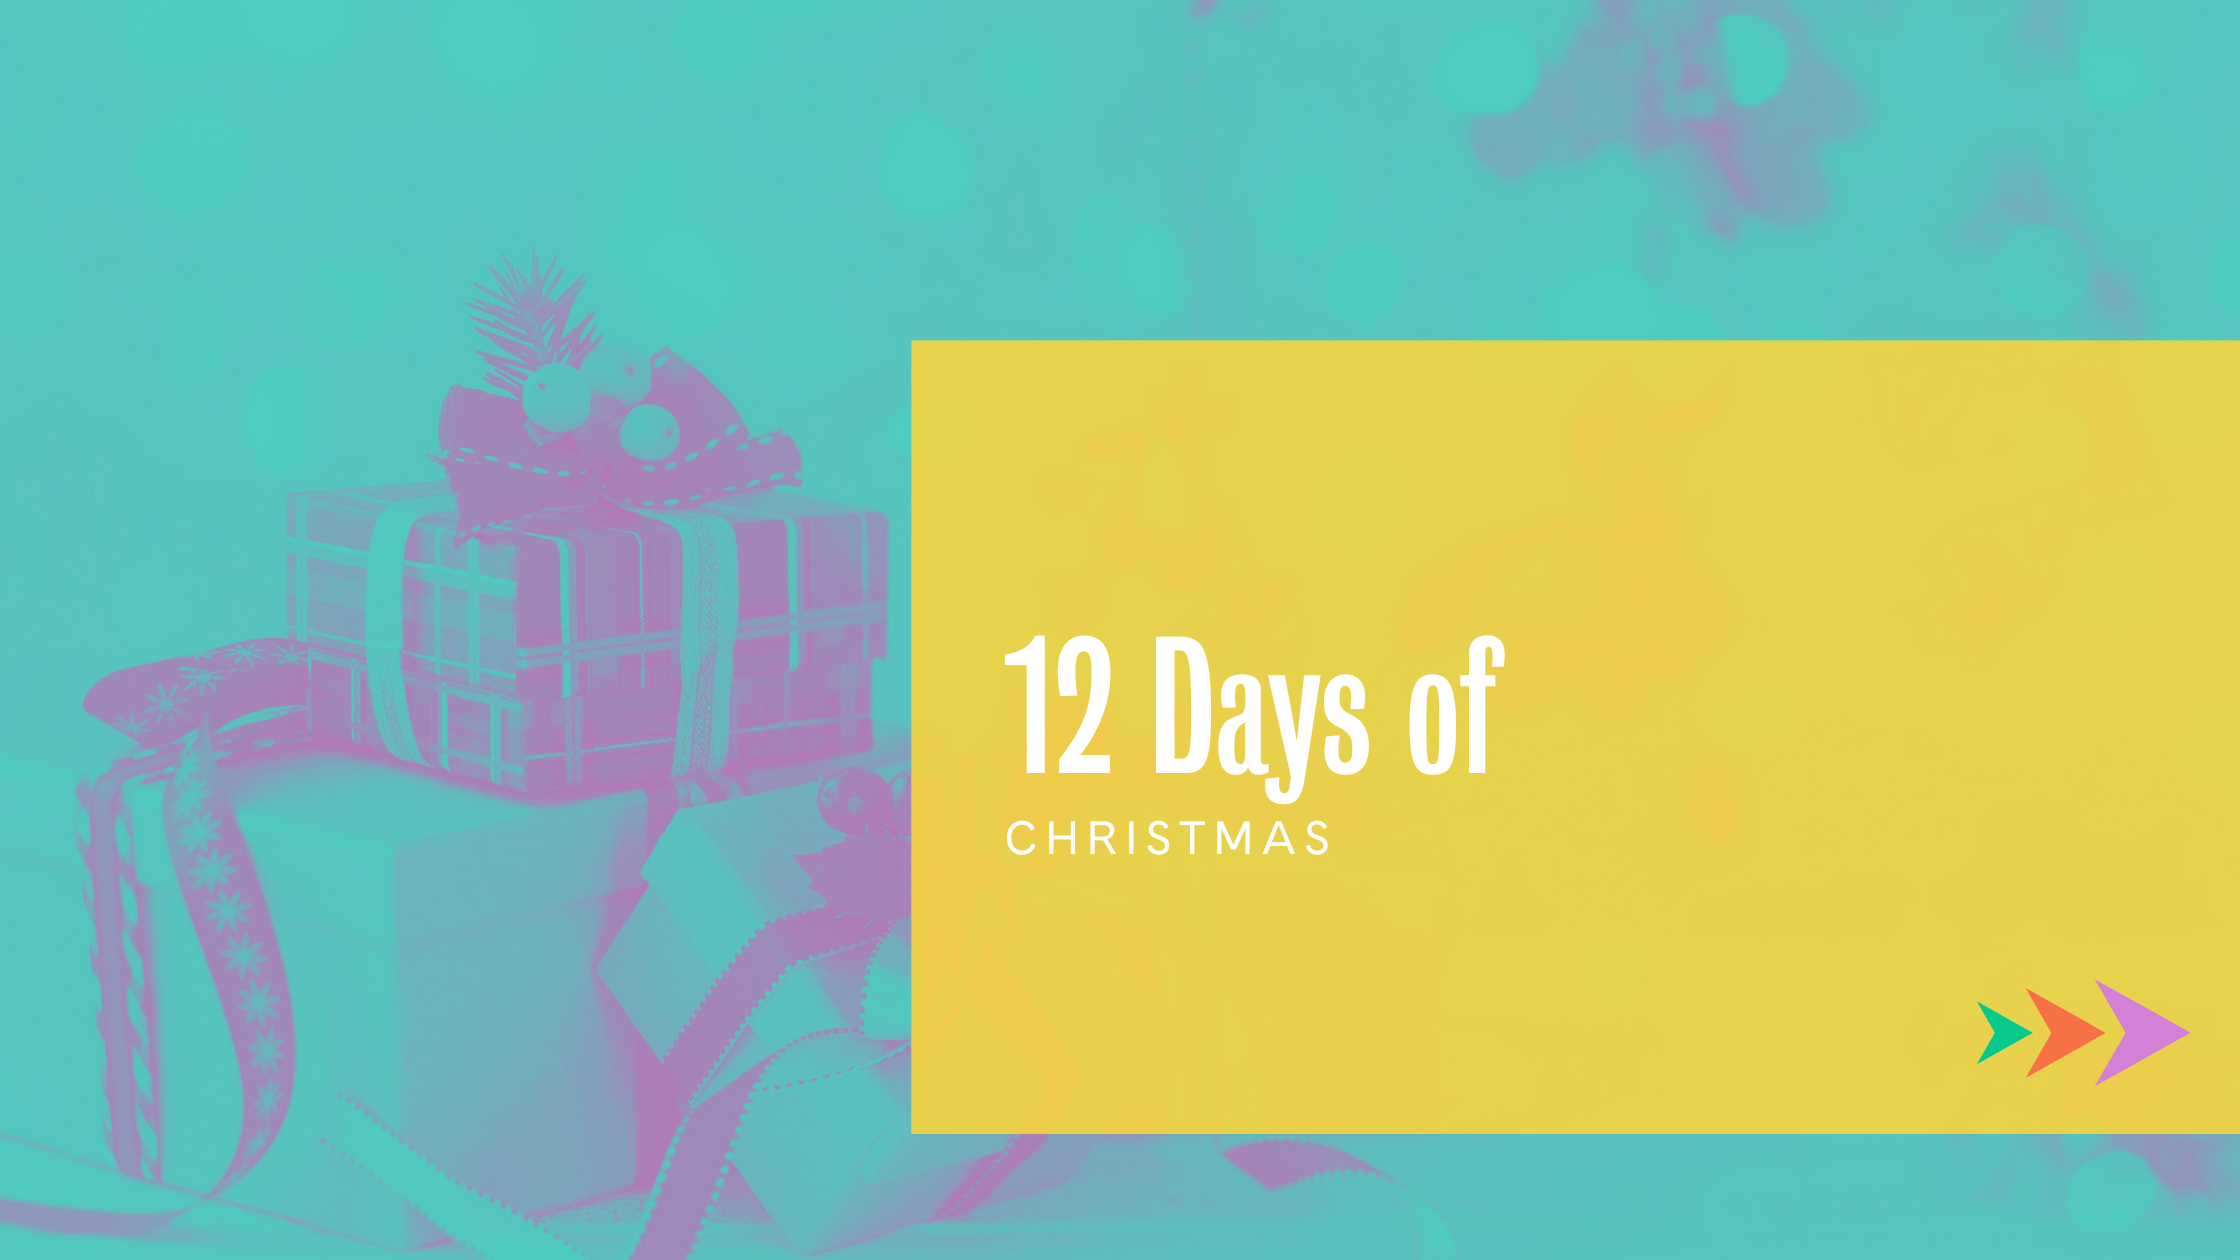 12 Days of Christmas Launch